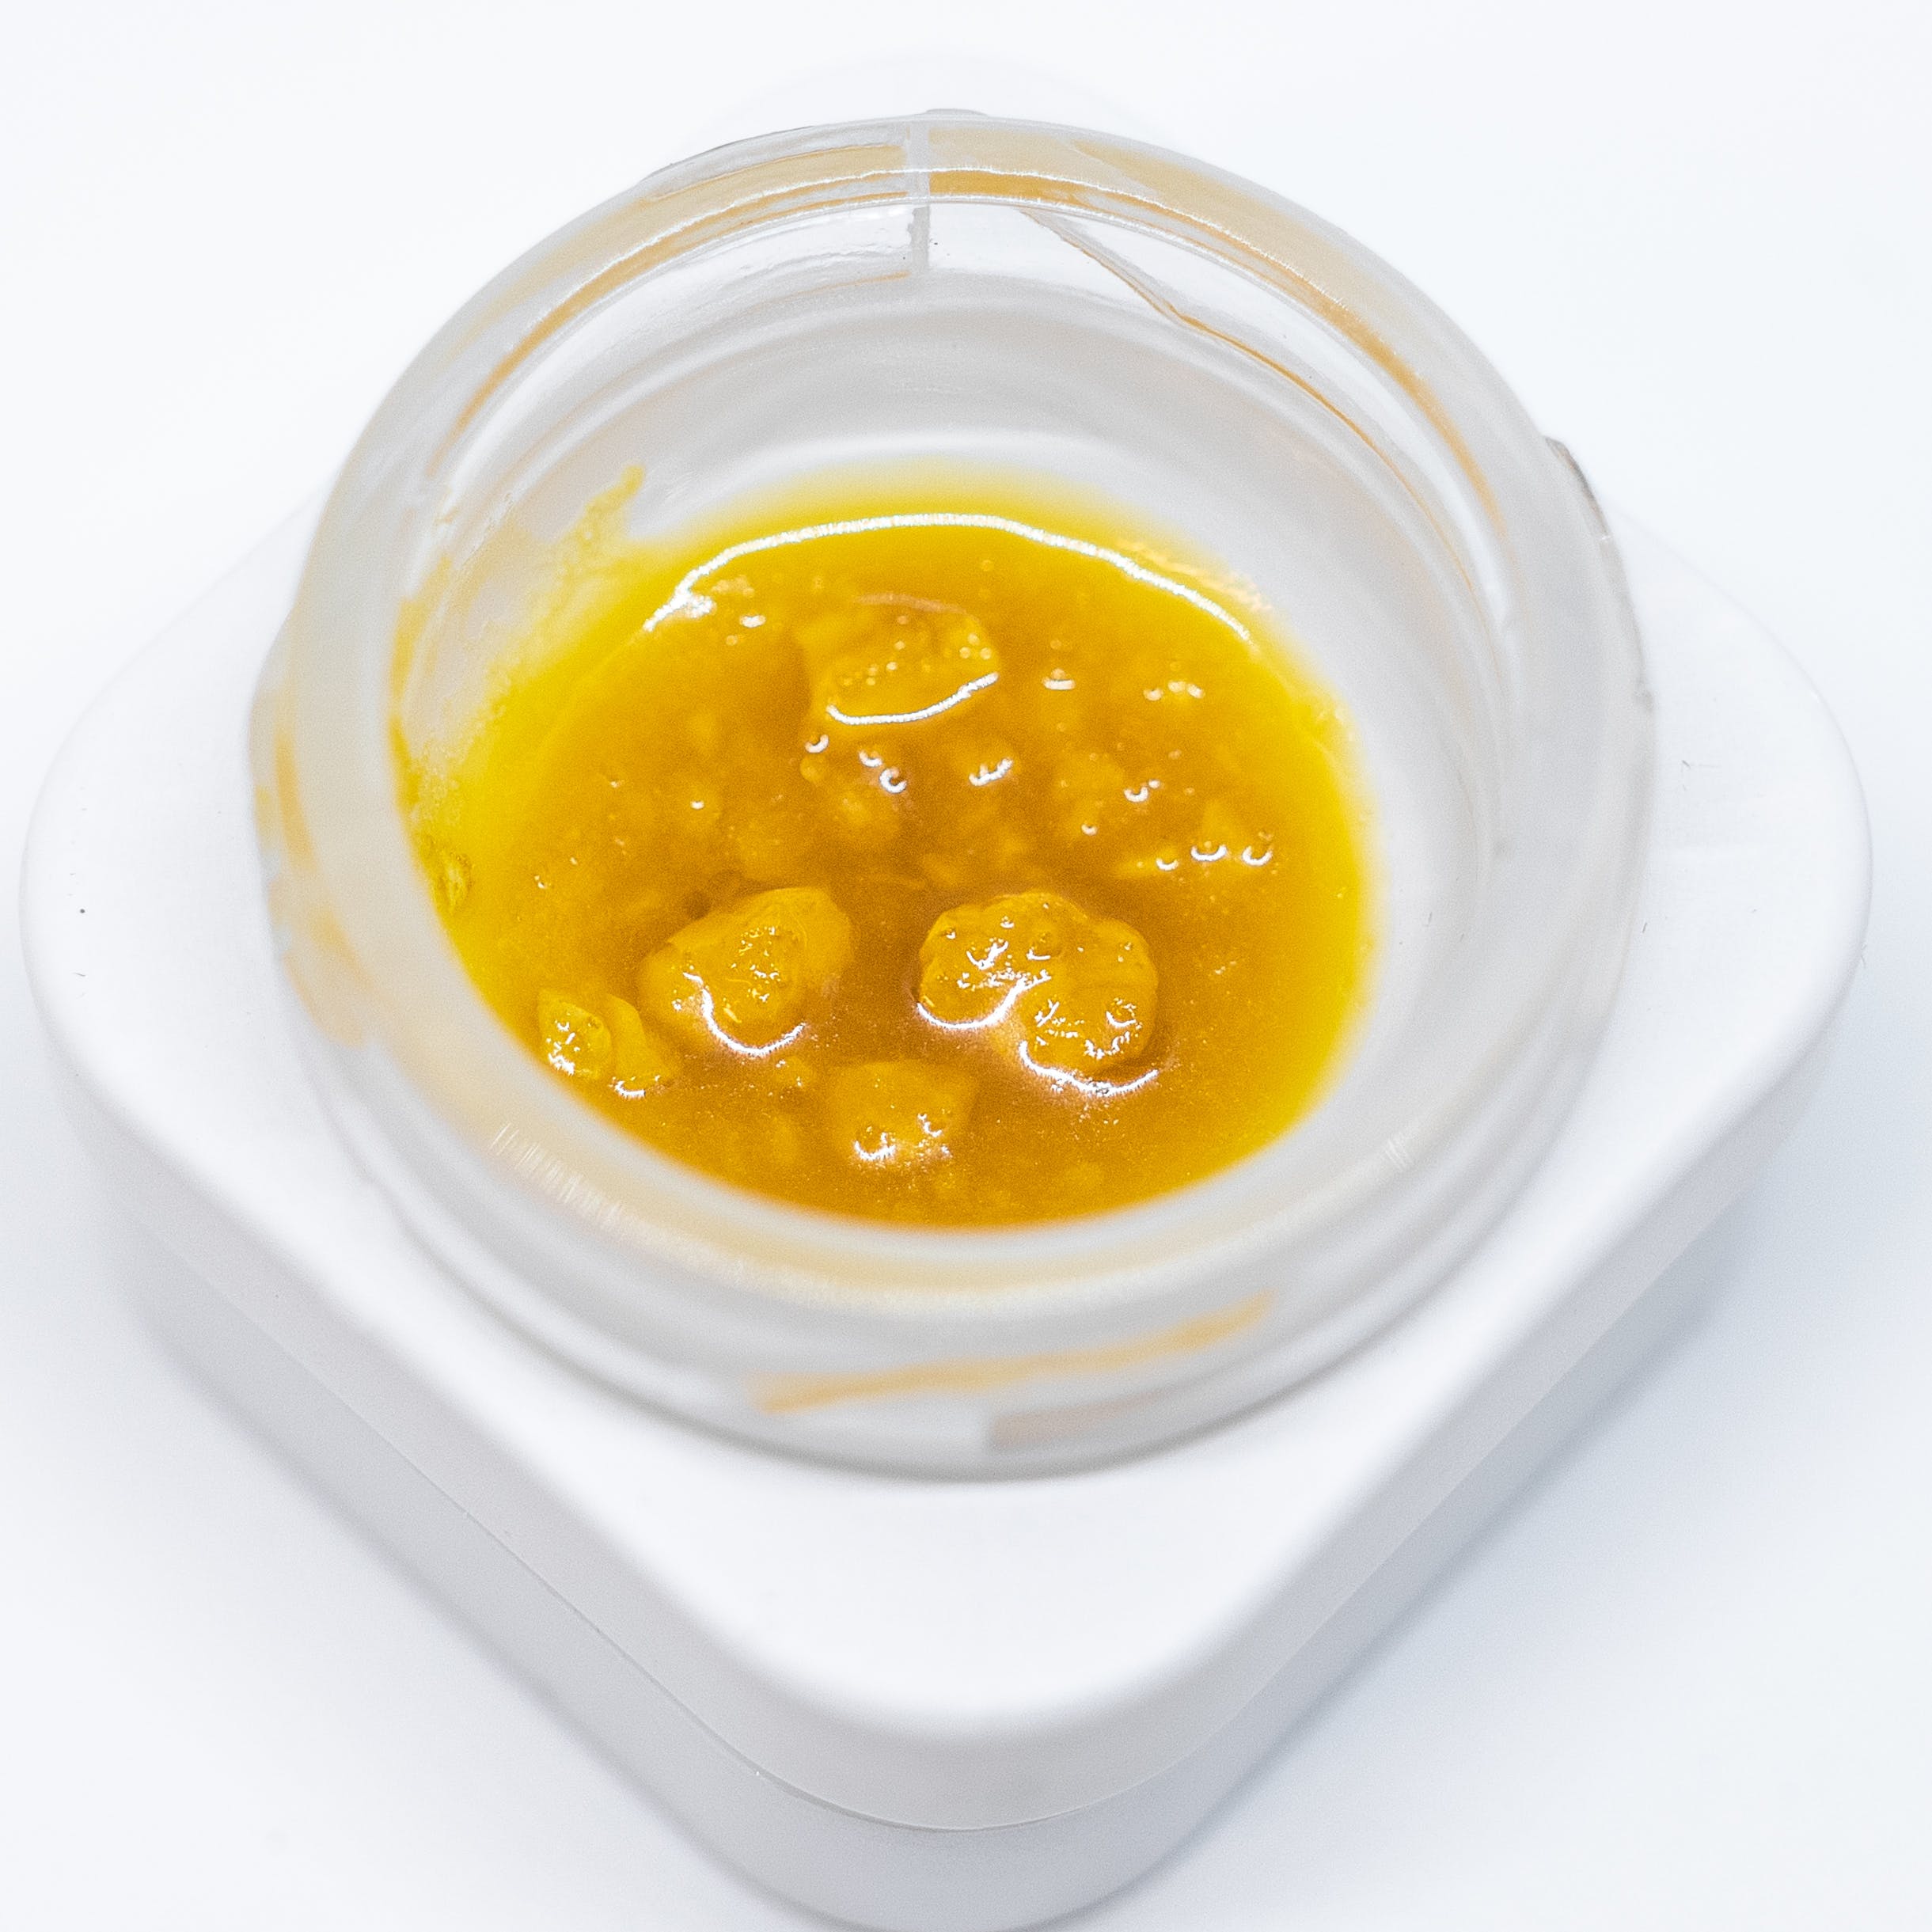 concentrate-2445-csc-golden-goat-live-resin-s-96-60-25